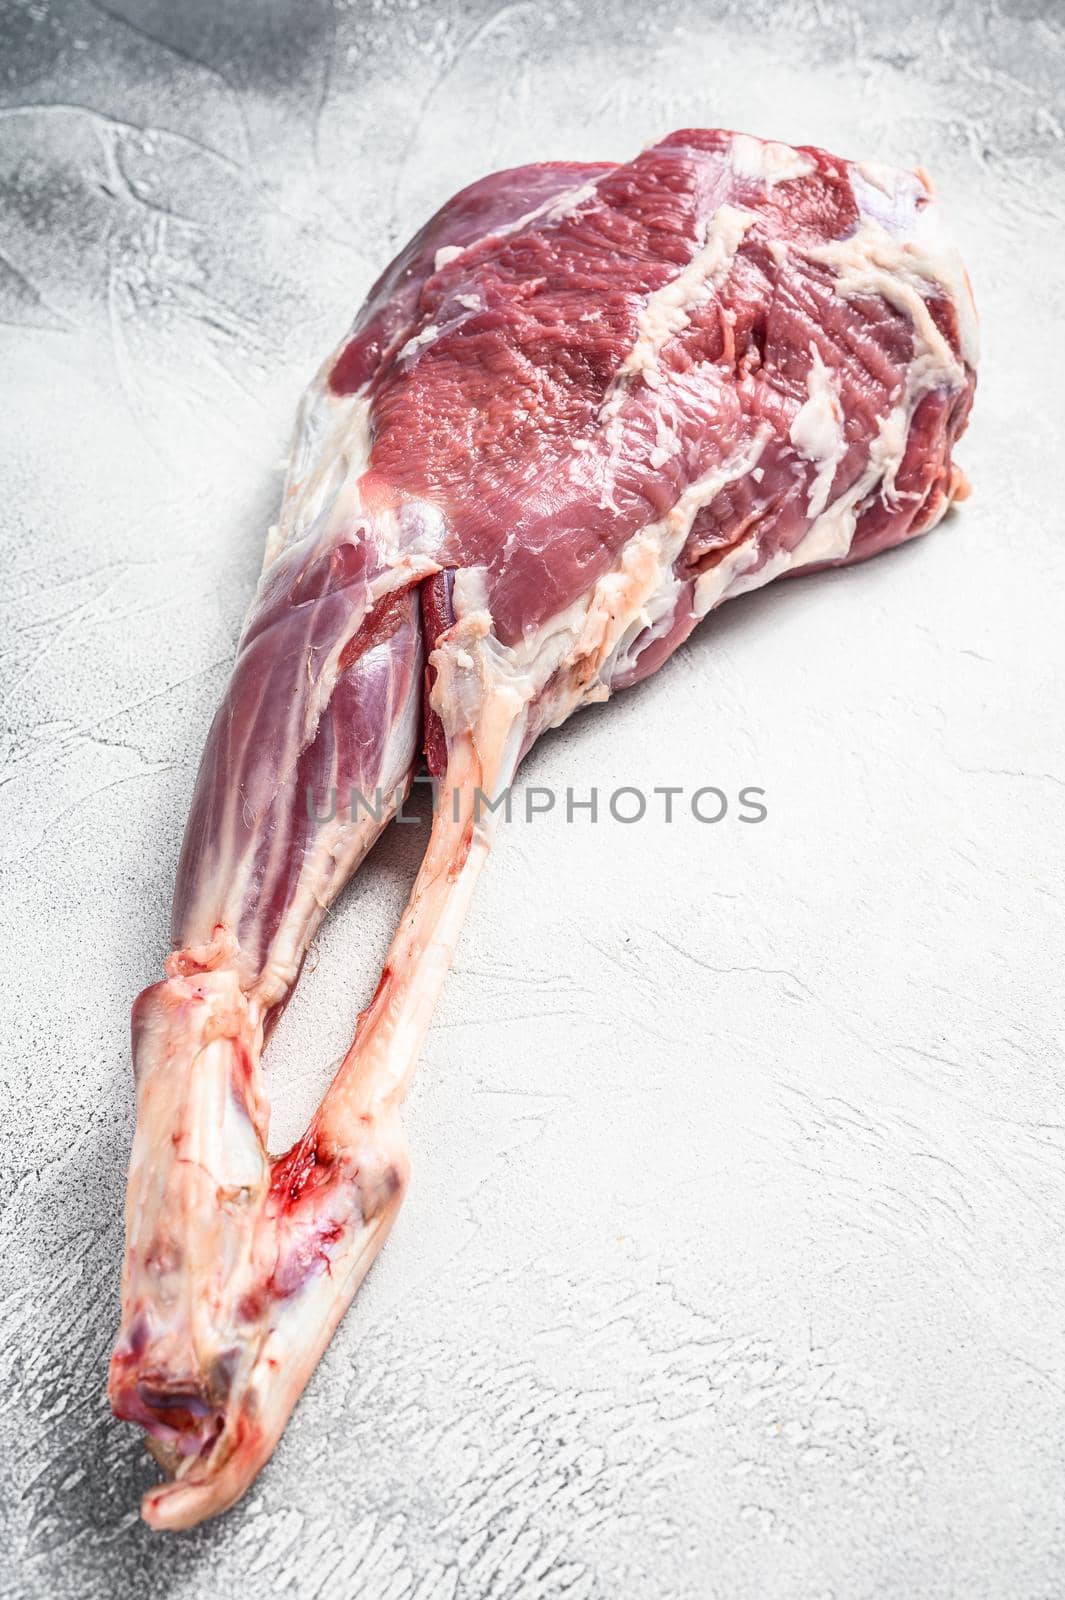 Goat leg with pepper and garlic. Raw Farm meat. White background. Top view.